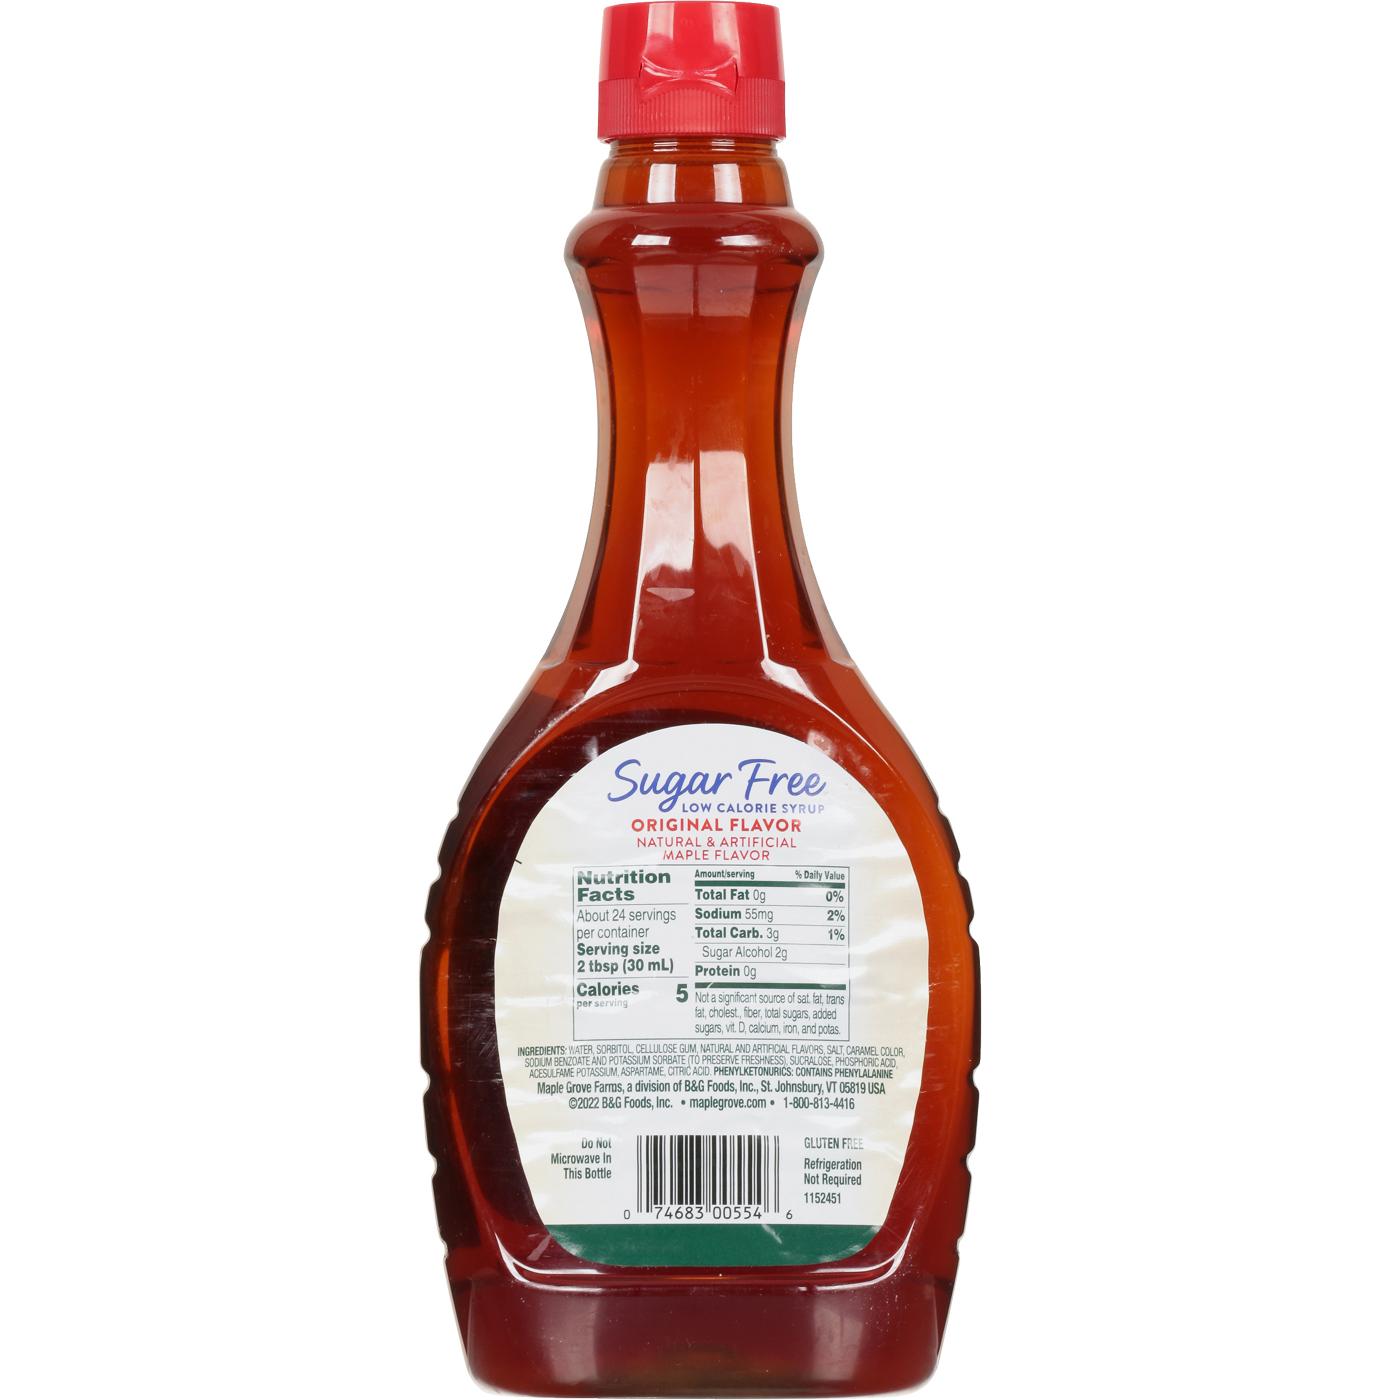 Maple Grove Farms Sugar Free Maple Flavor Syrup; image 2 of 2